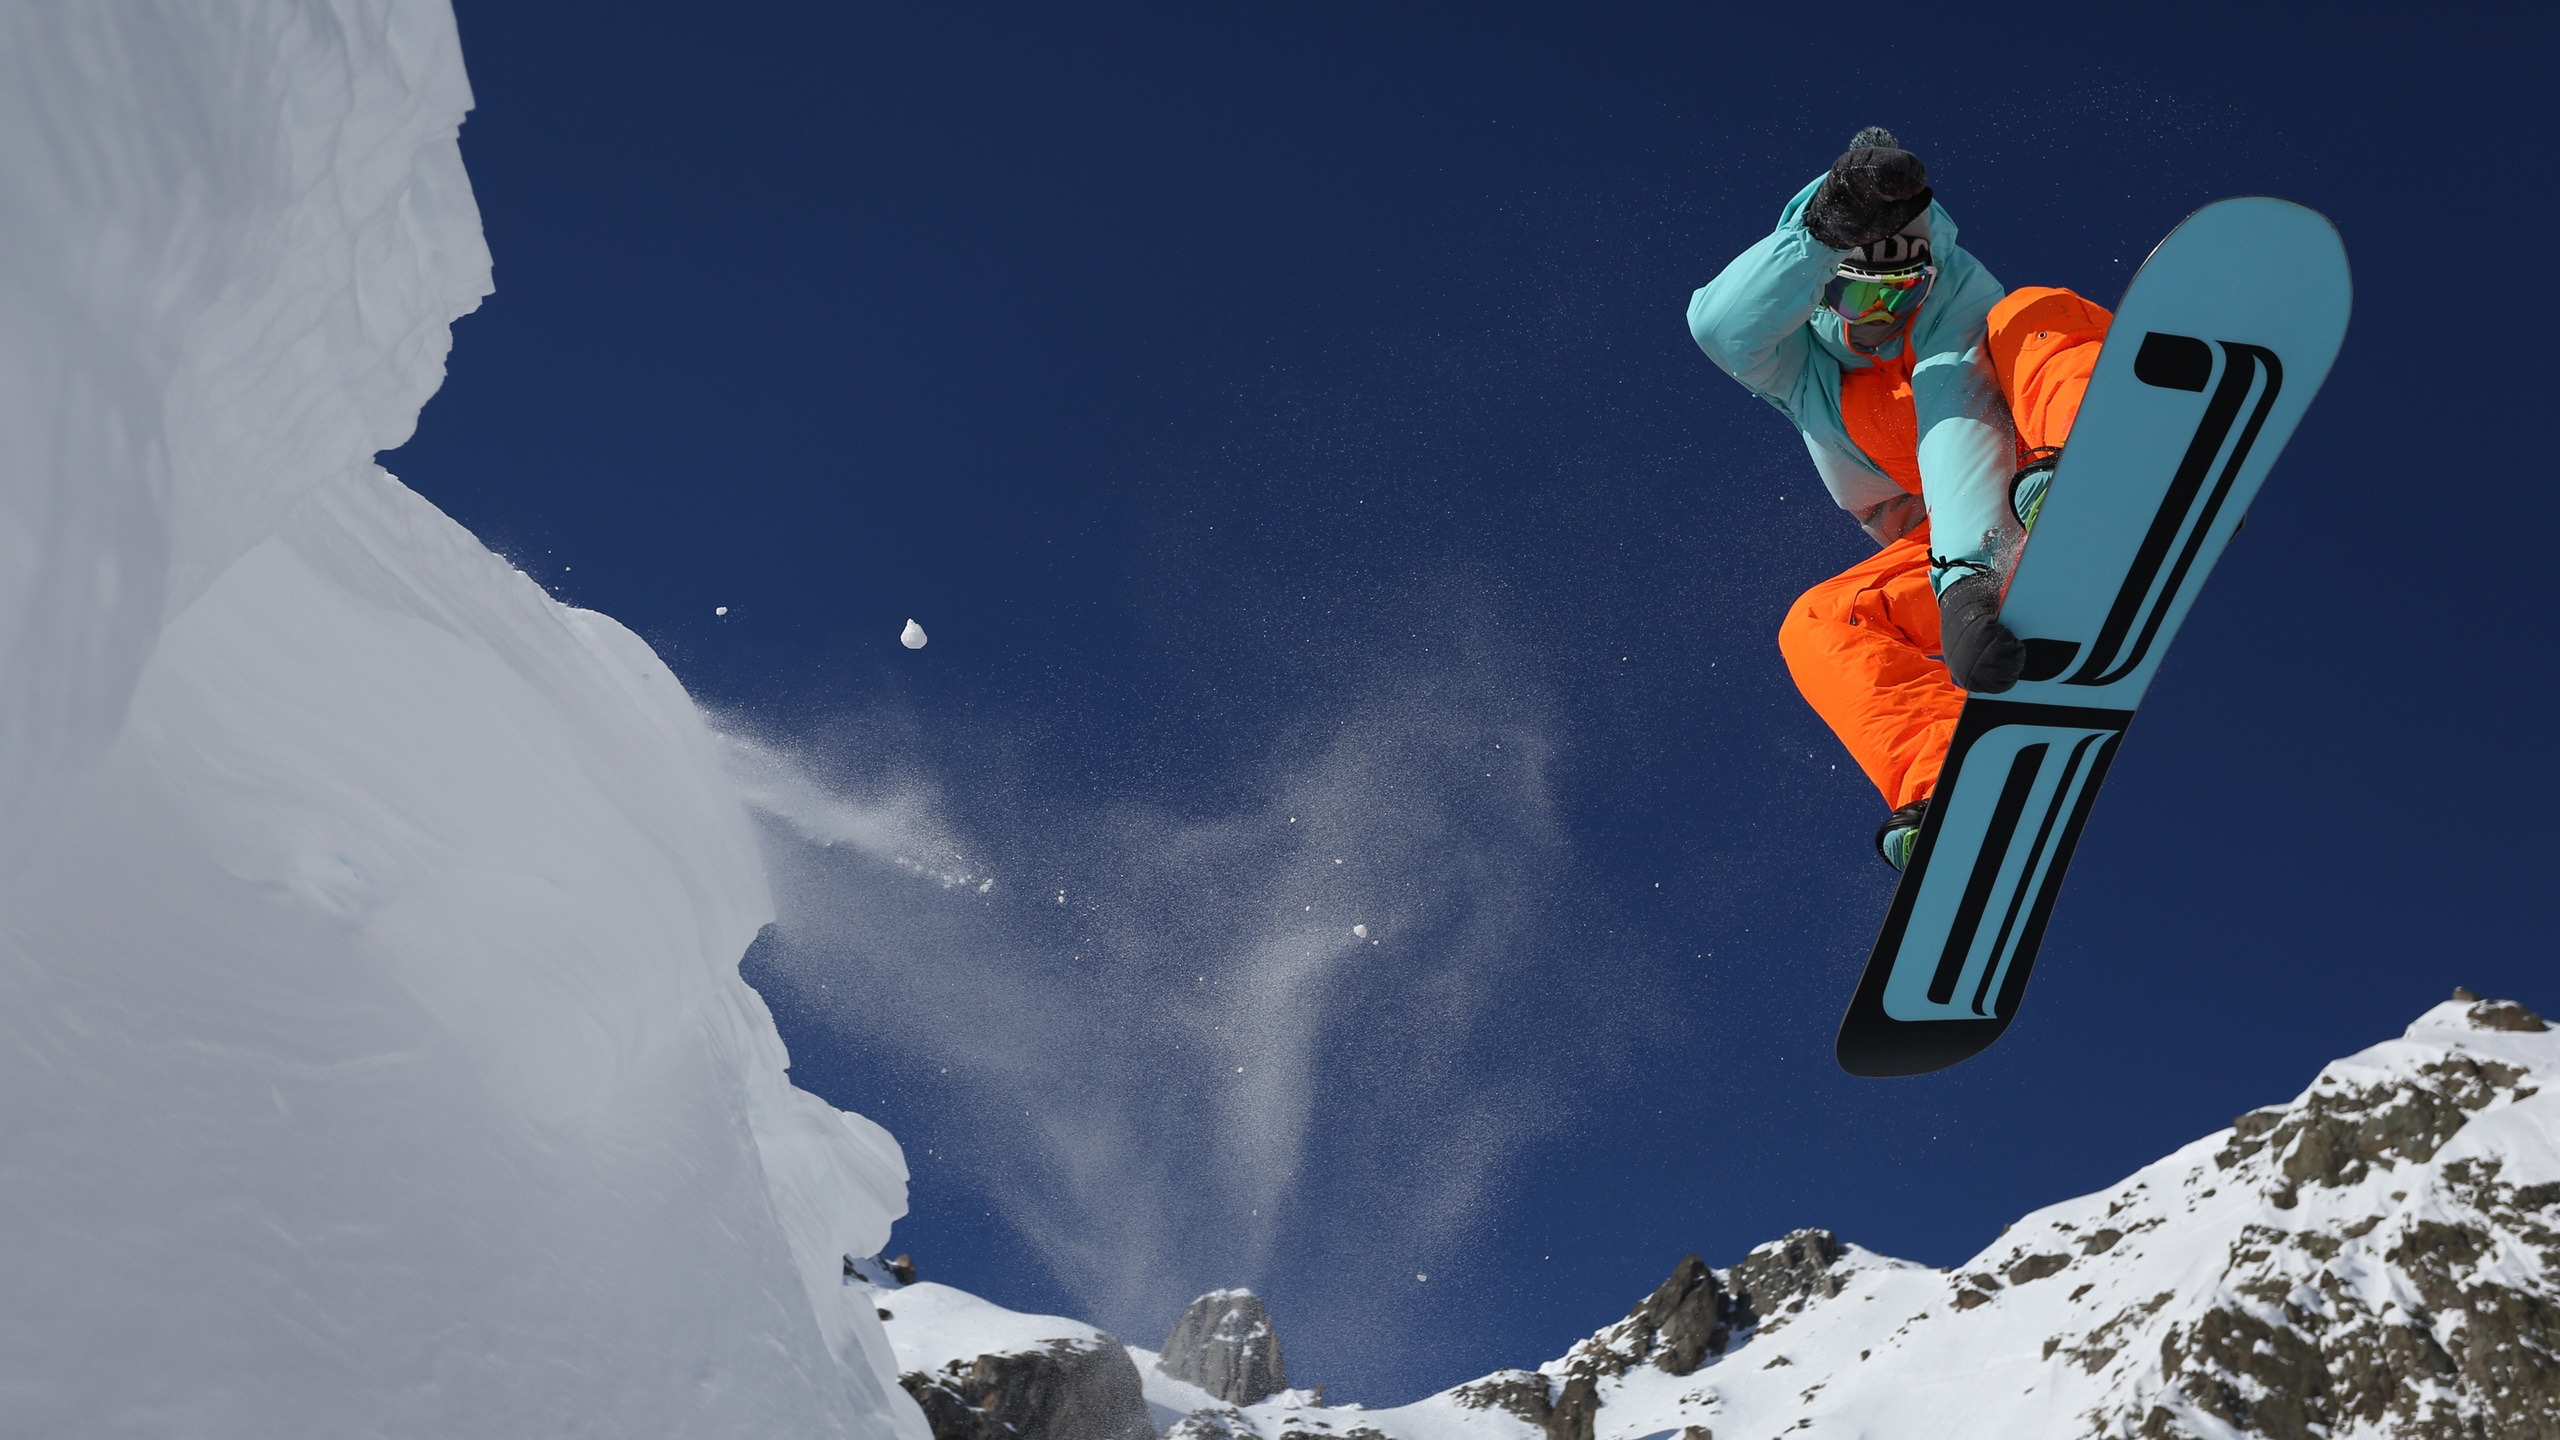 Extreme Snowboarding Adventure for 2560x1440 HDTV resolution